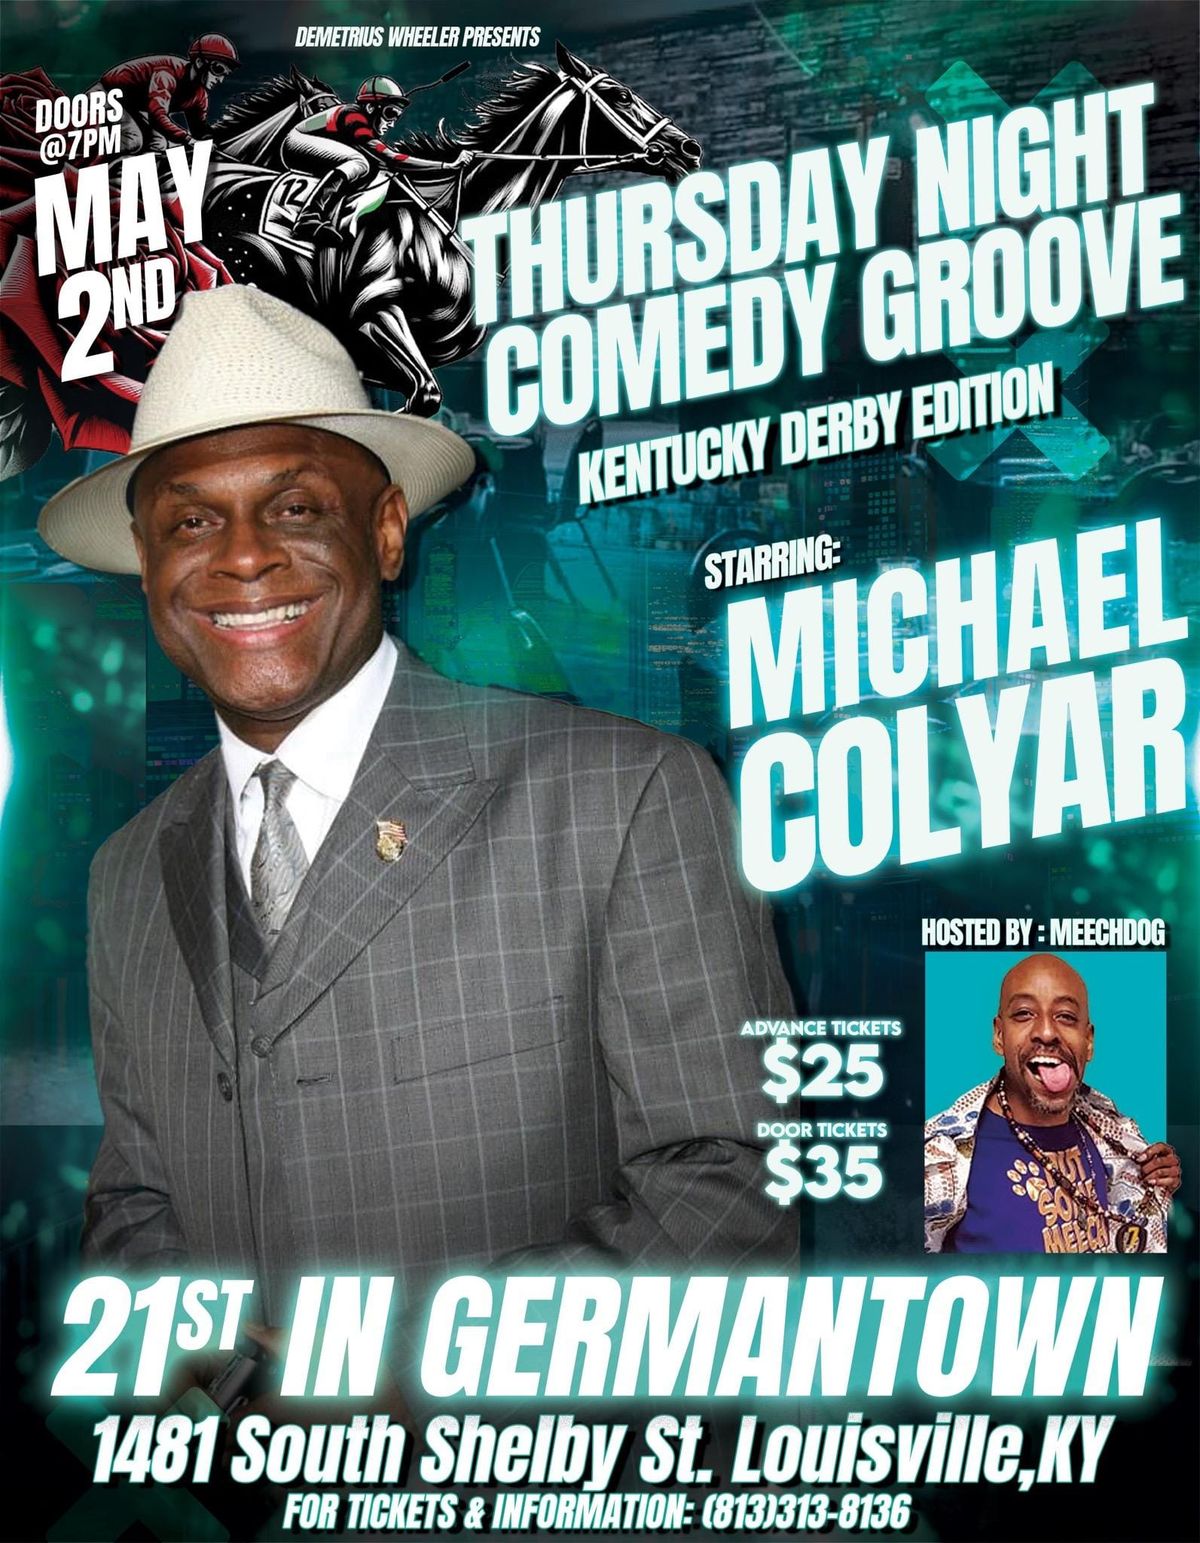 Thursday Night Comedy Groove 